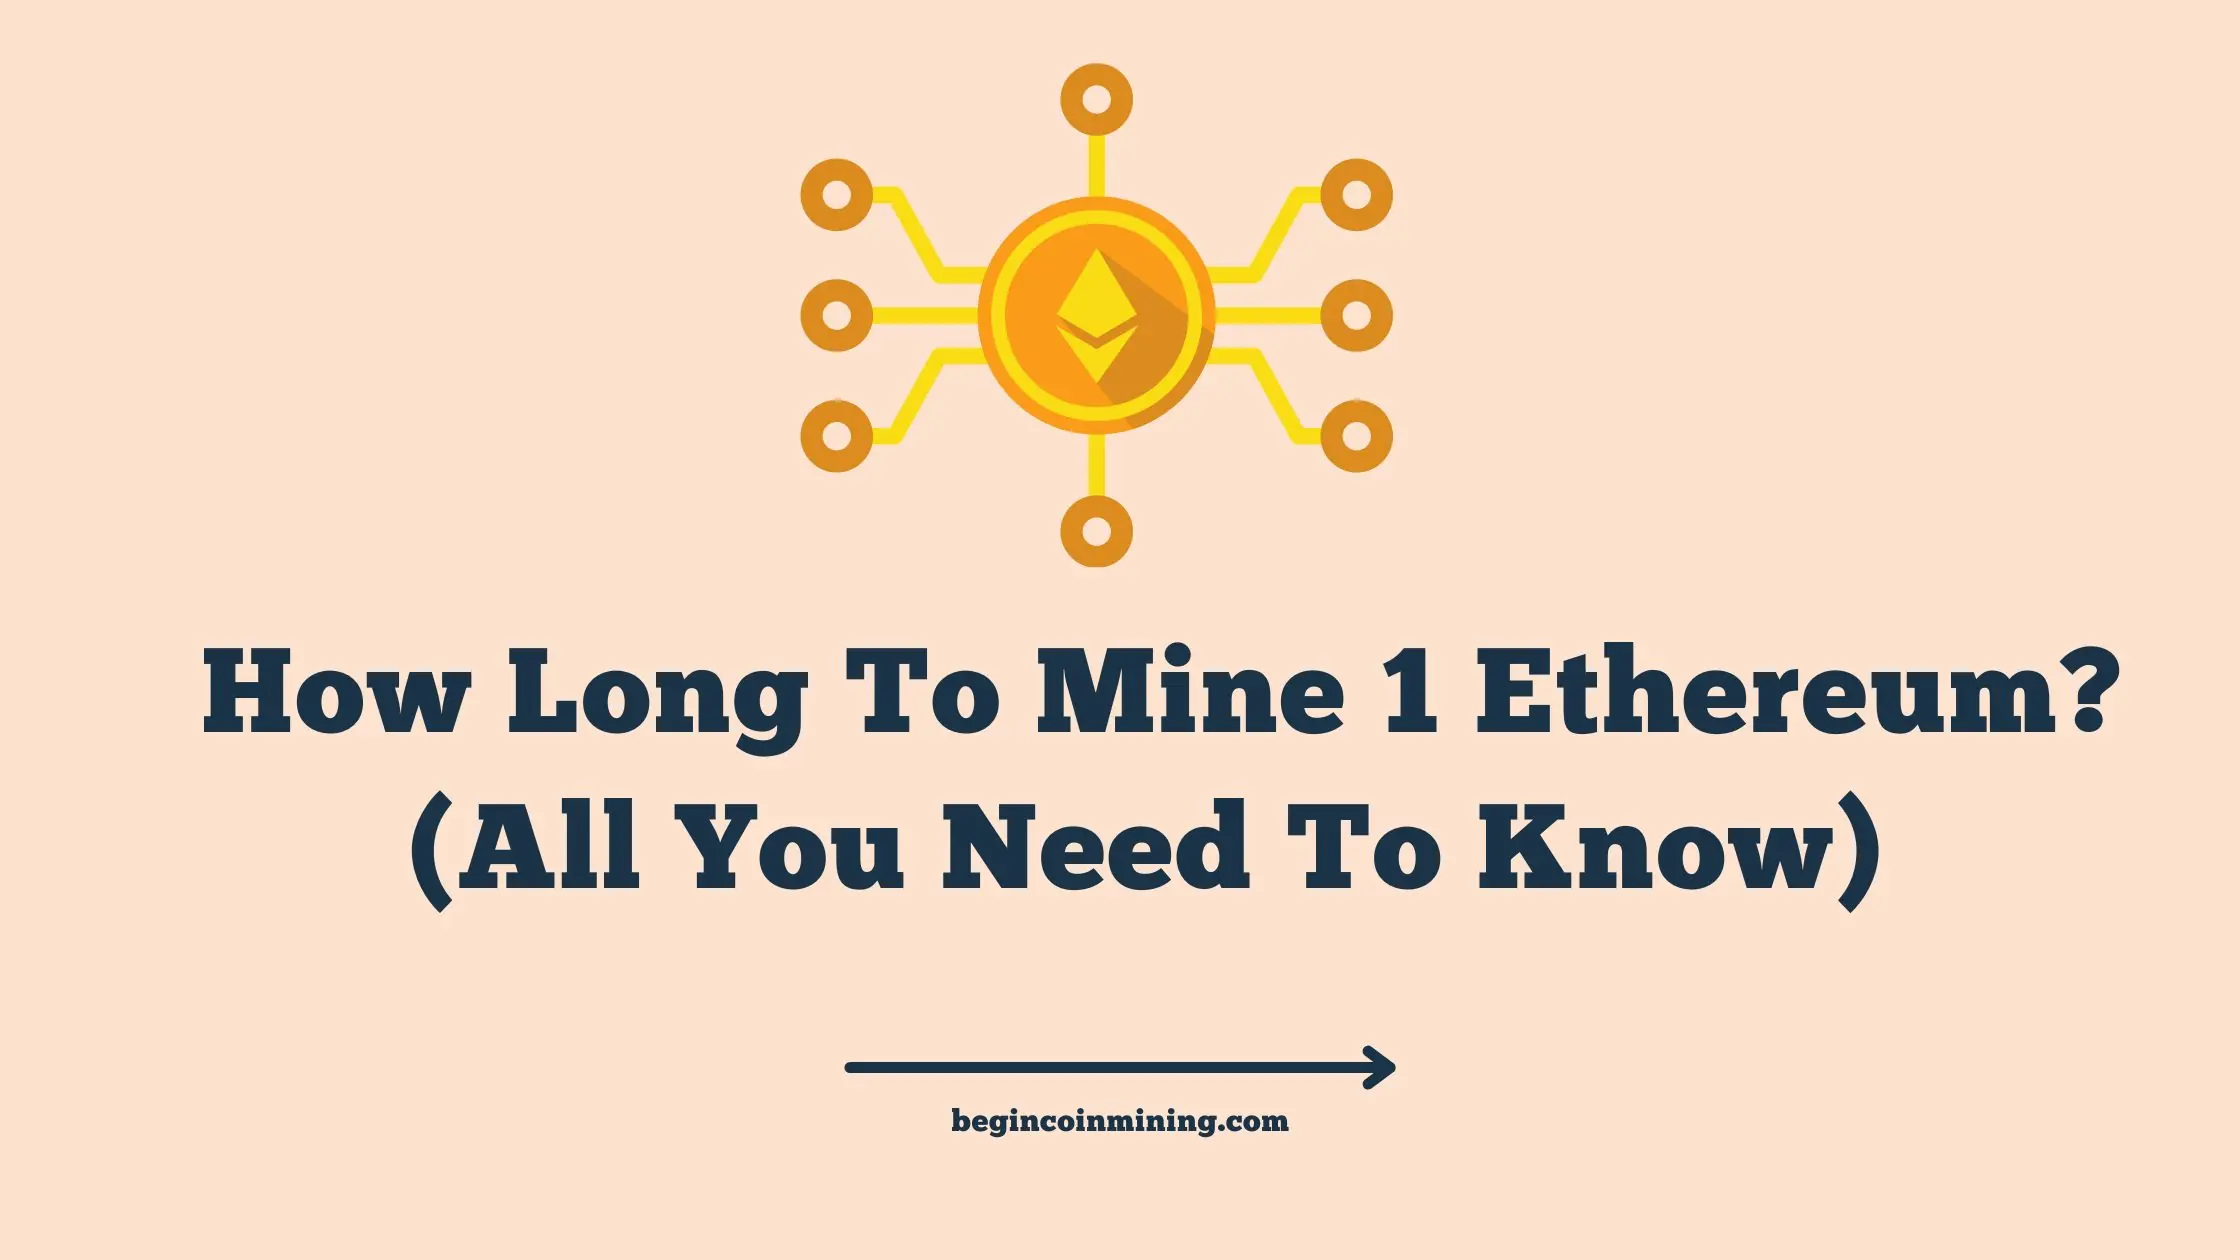 How Long to Mine 1 Ethereum